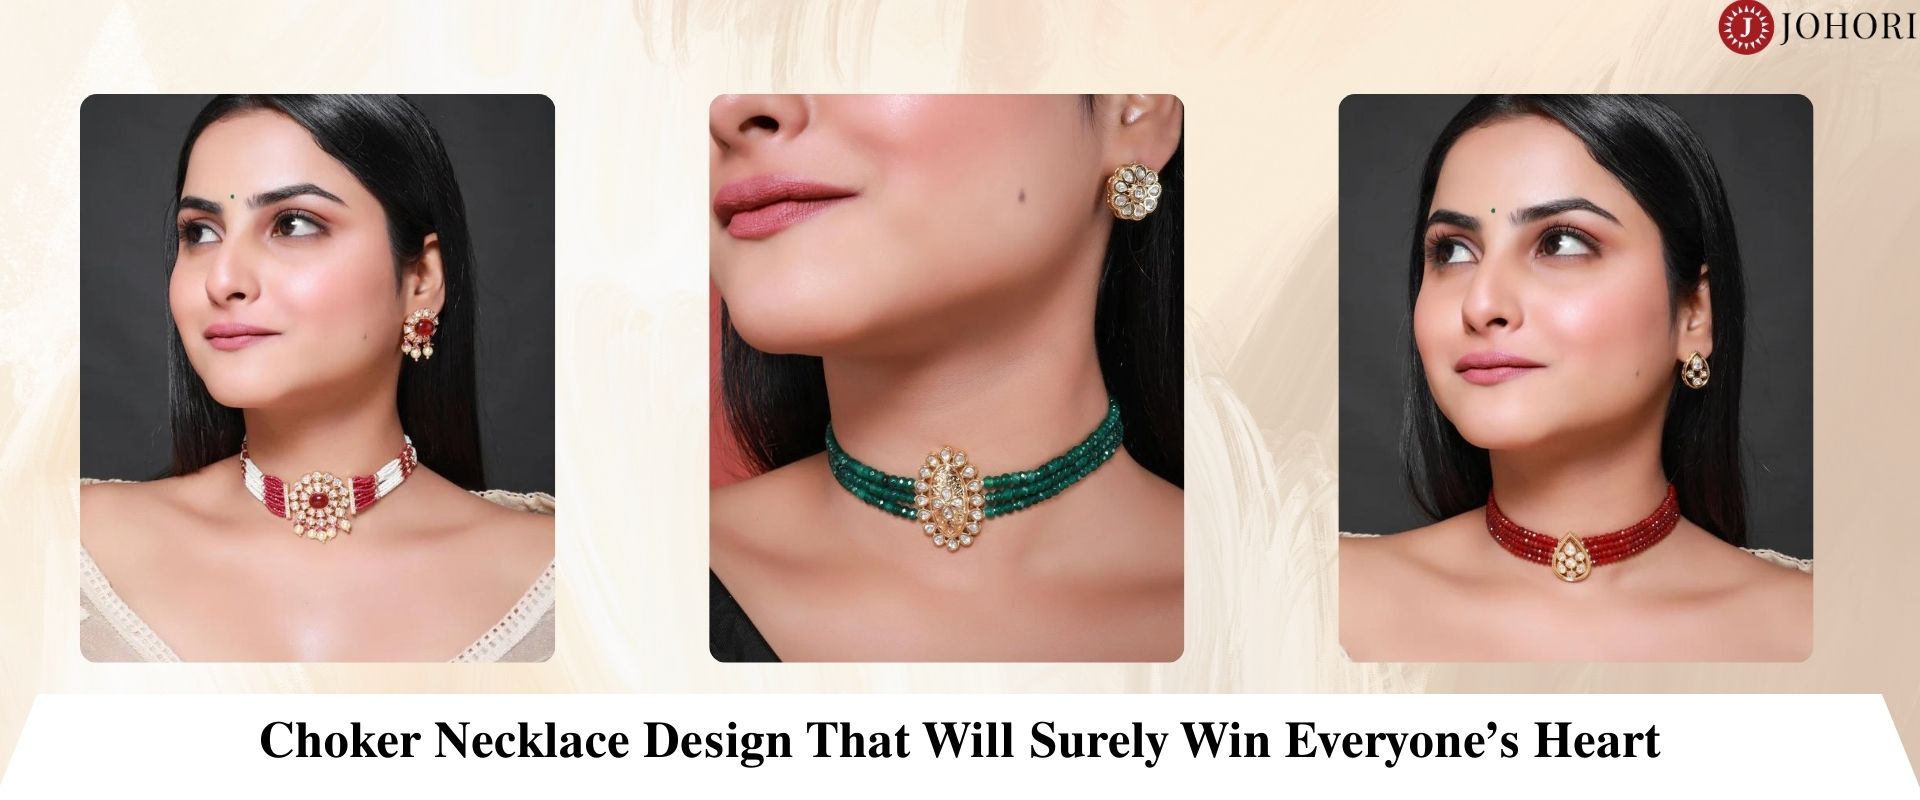 Choker Necklace Design That Will Surely Win Everyone’s Heart